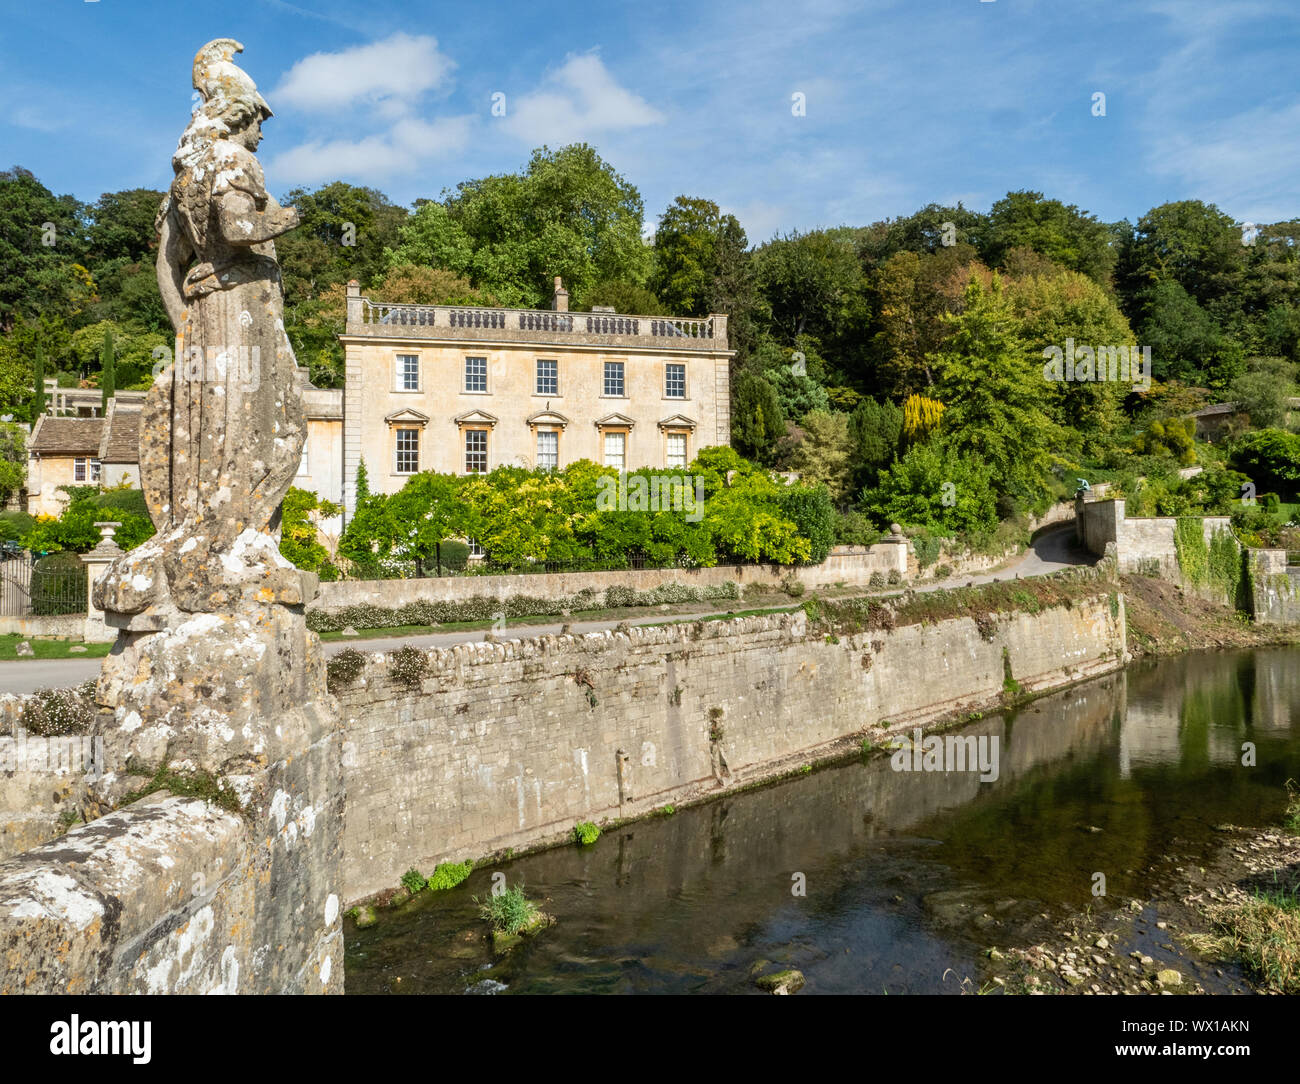 Statue of Britannia on the river bridge leading to Iford Manor a charming country house in the Frome Valley in Wiltshire UK Stock Photo